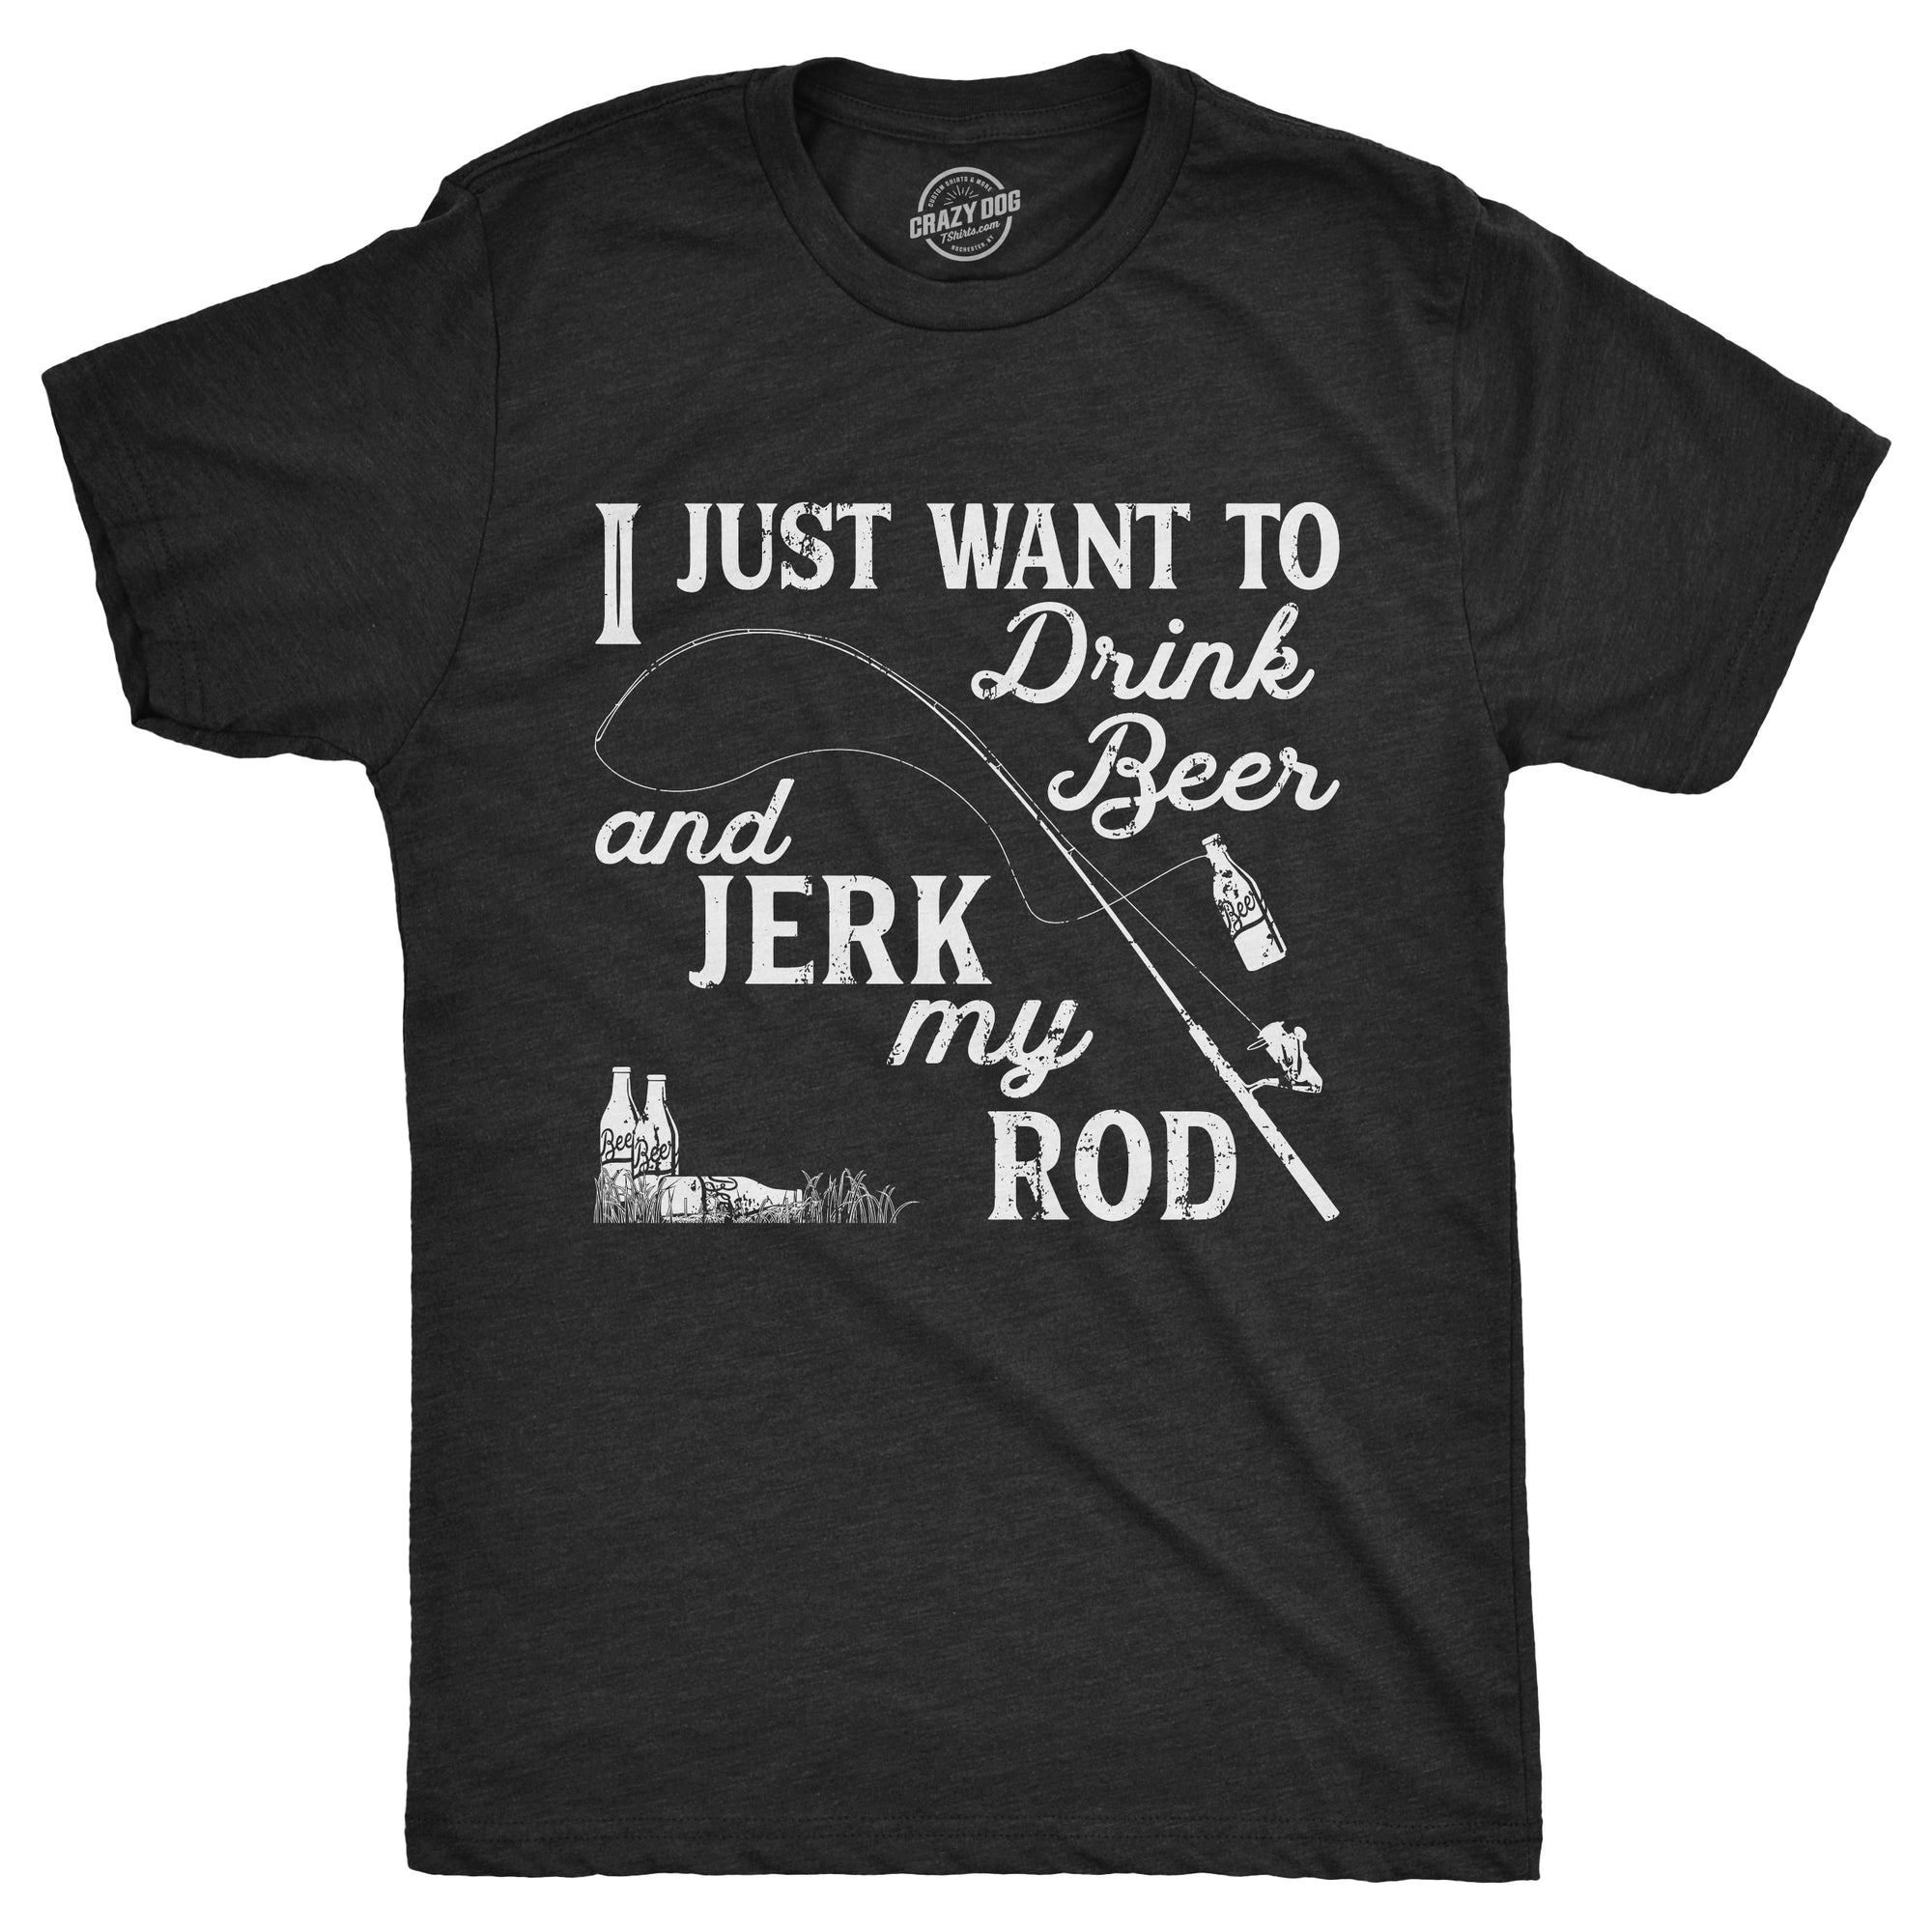 Funny Heather Black I Just Want To Drink Beer And Jerk My Rod Mens T Shirt Nerdy Beer Fishing Tee